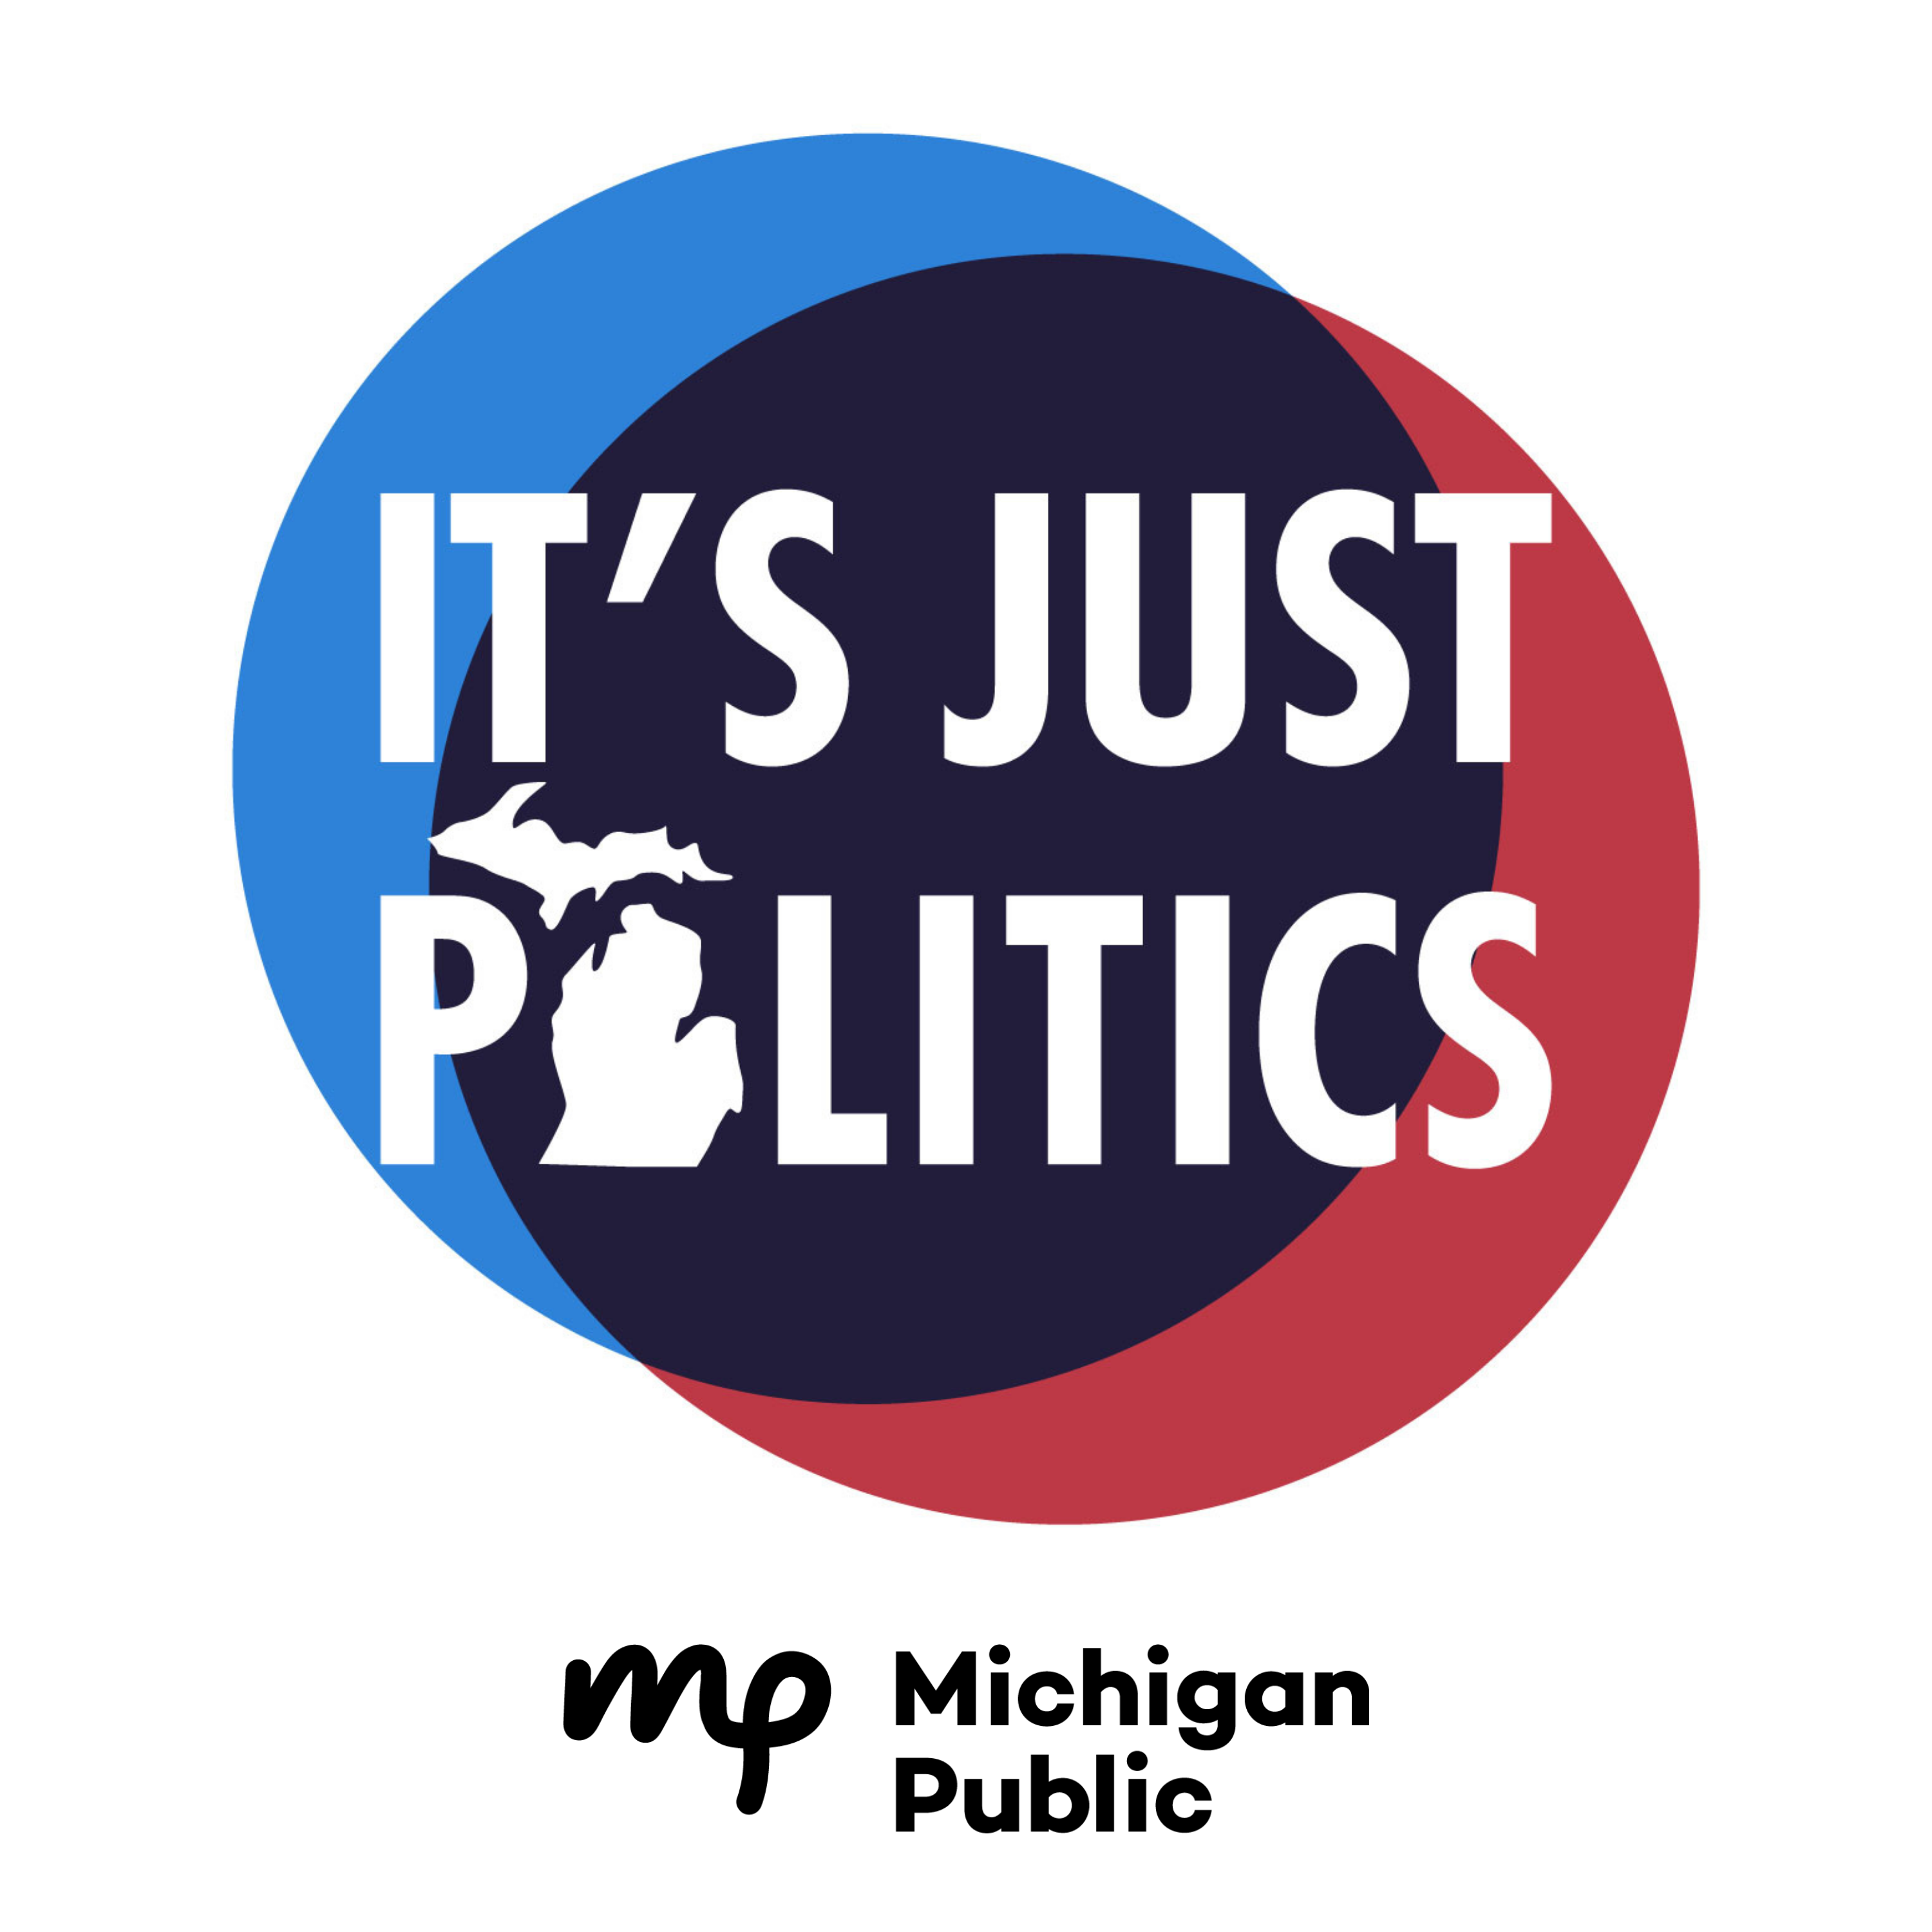 A Historic Election in Michigan